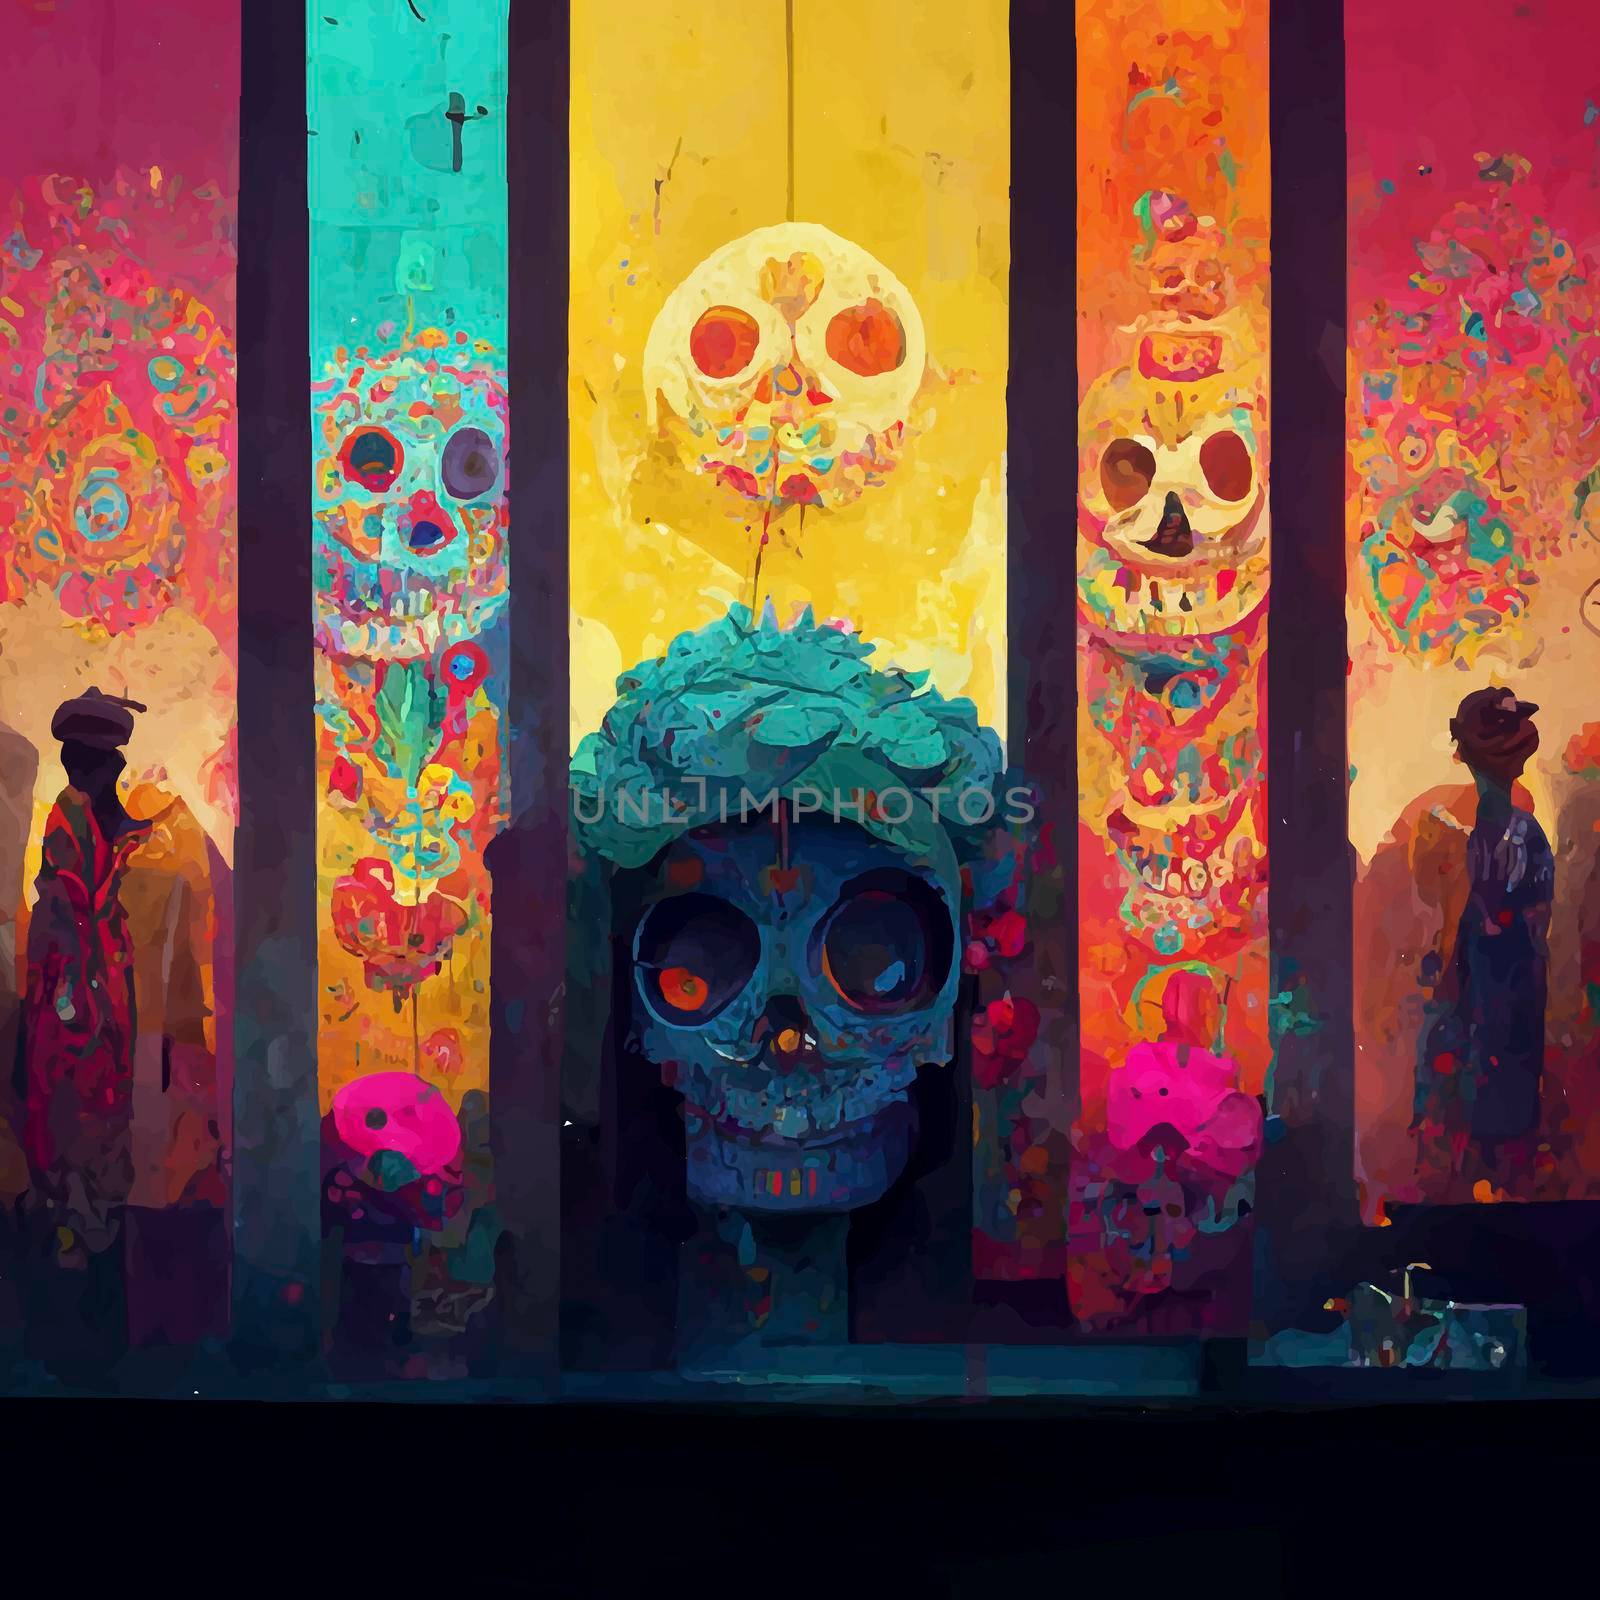 beautiful illustration of the Day of the Dead. by JpRamos